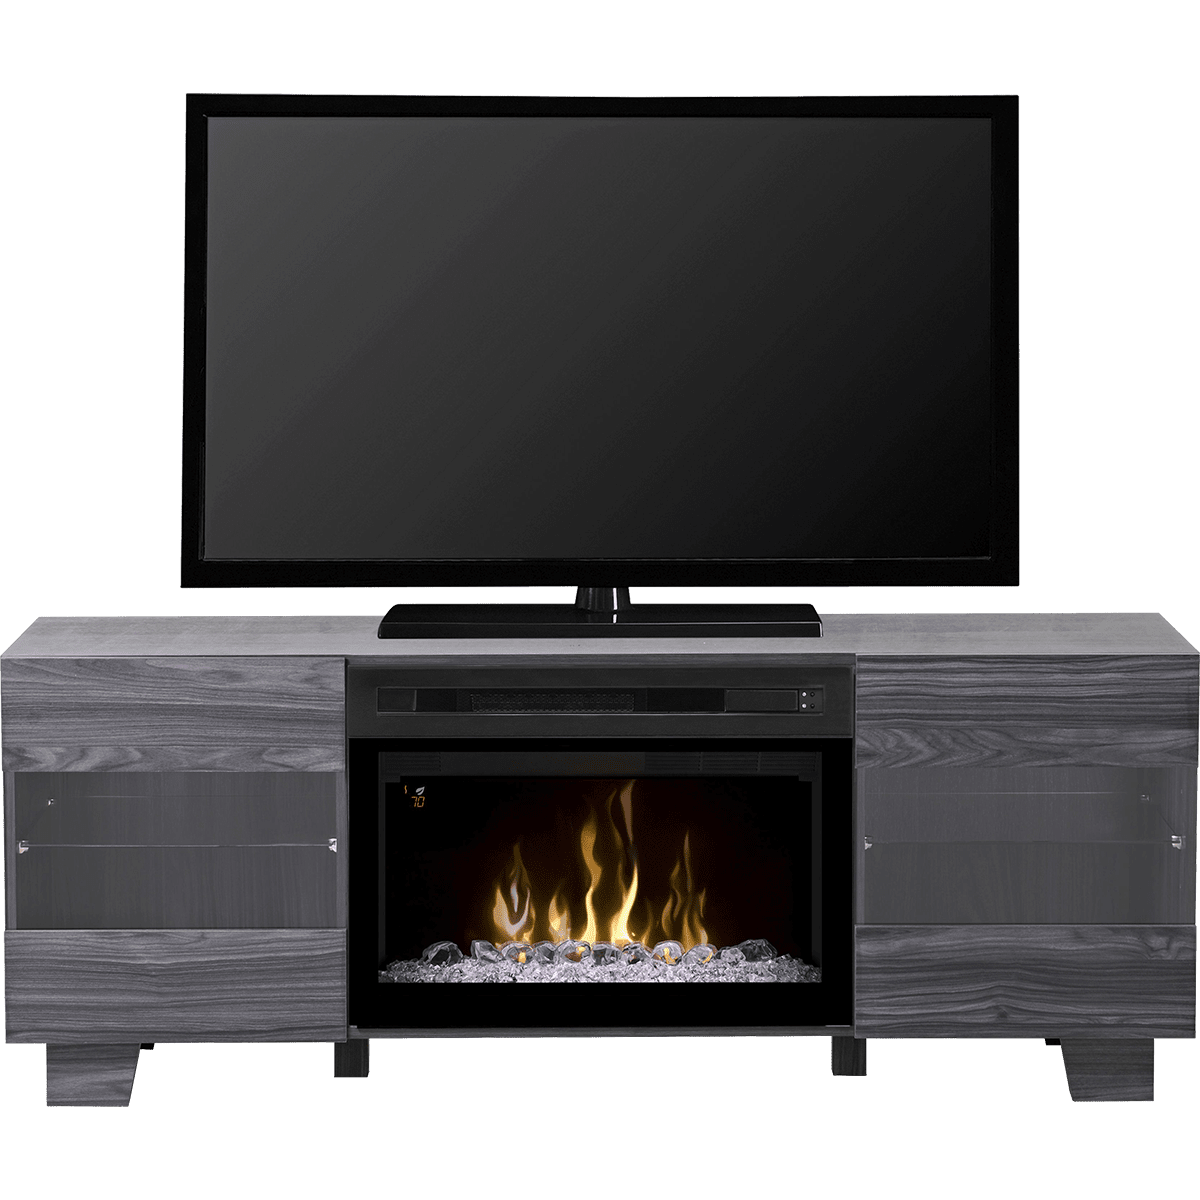 Dimplex Max 62 Electric Fireplace Tv, Dimplex Tv Stand Fireplace